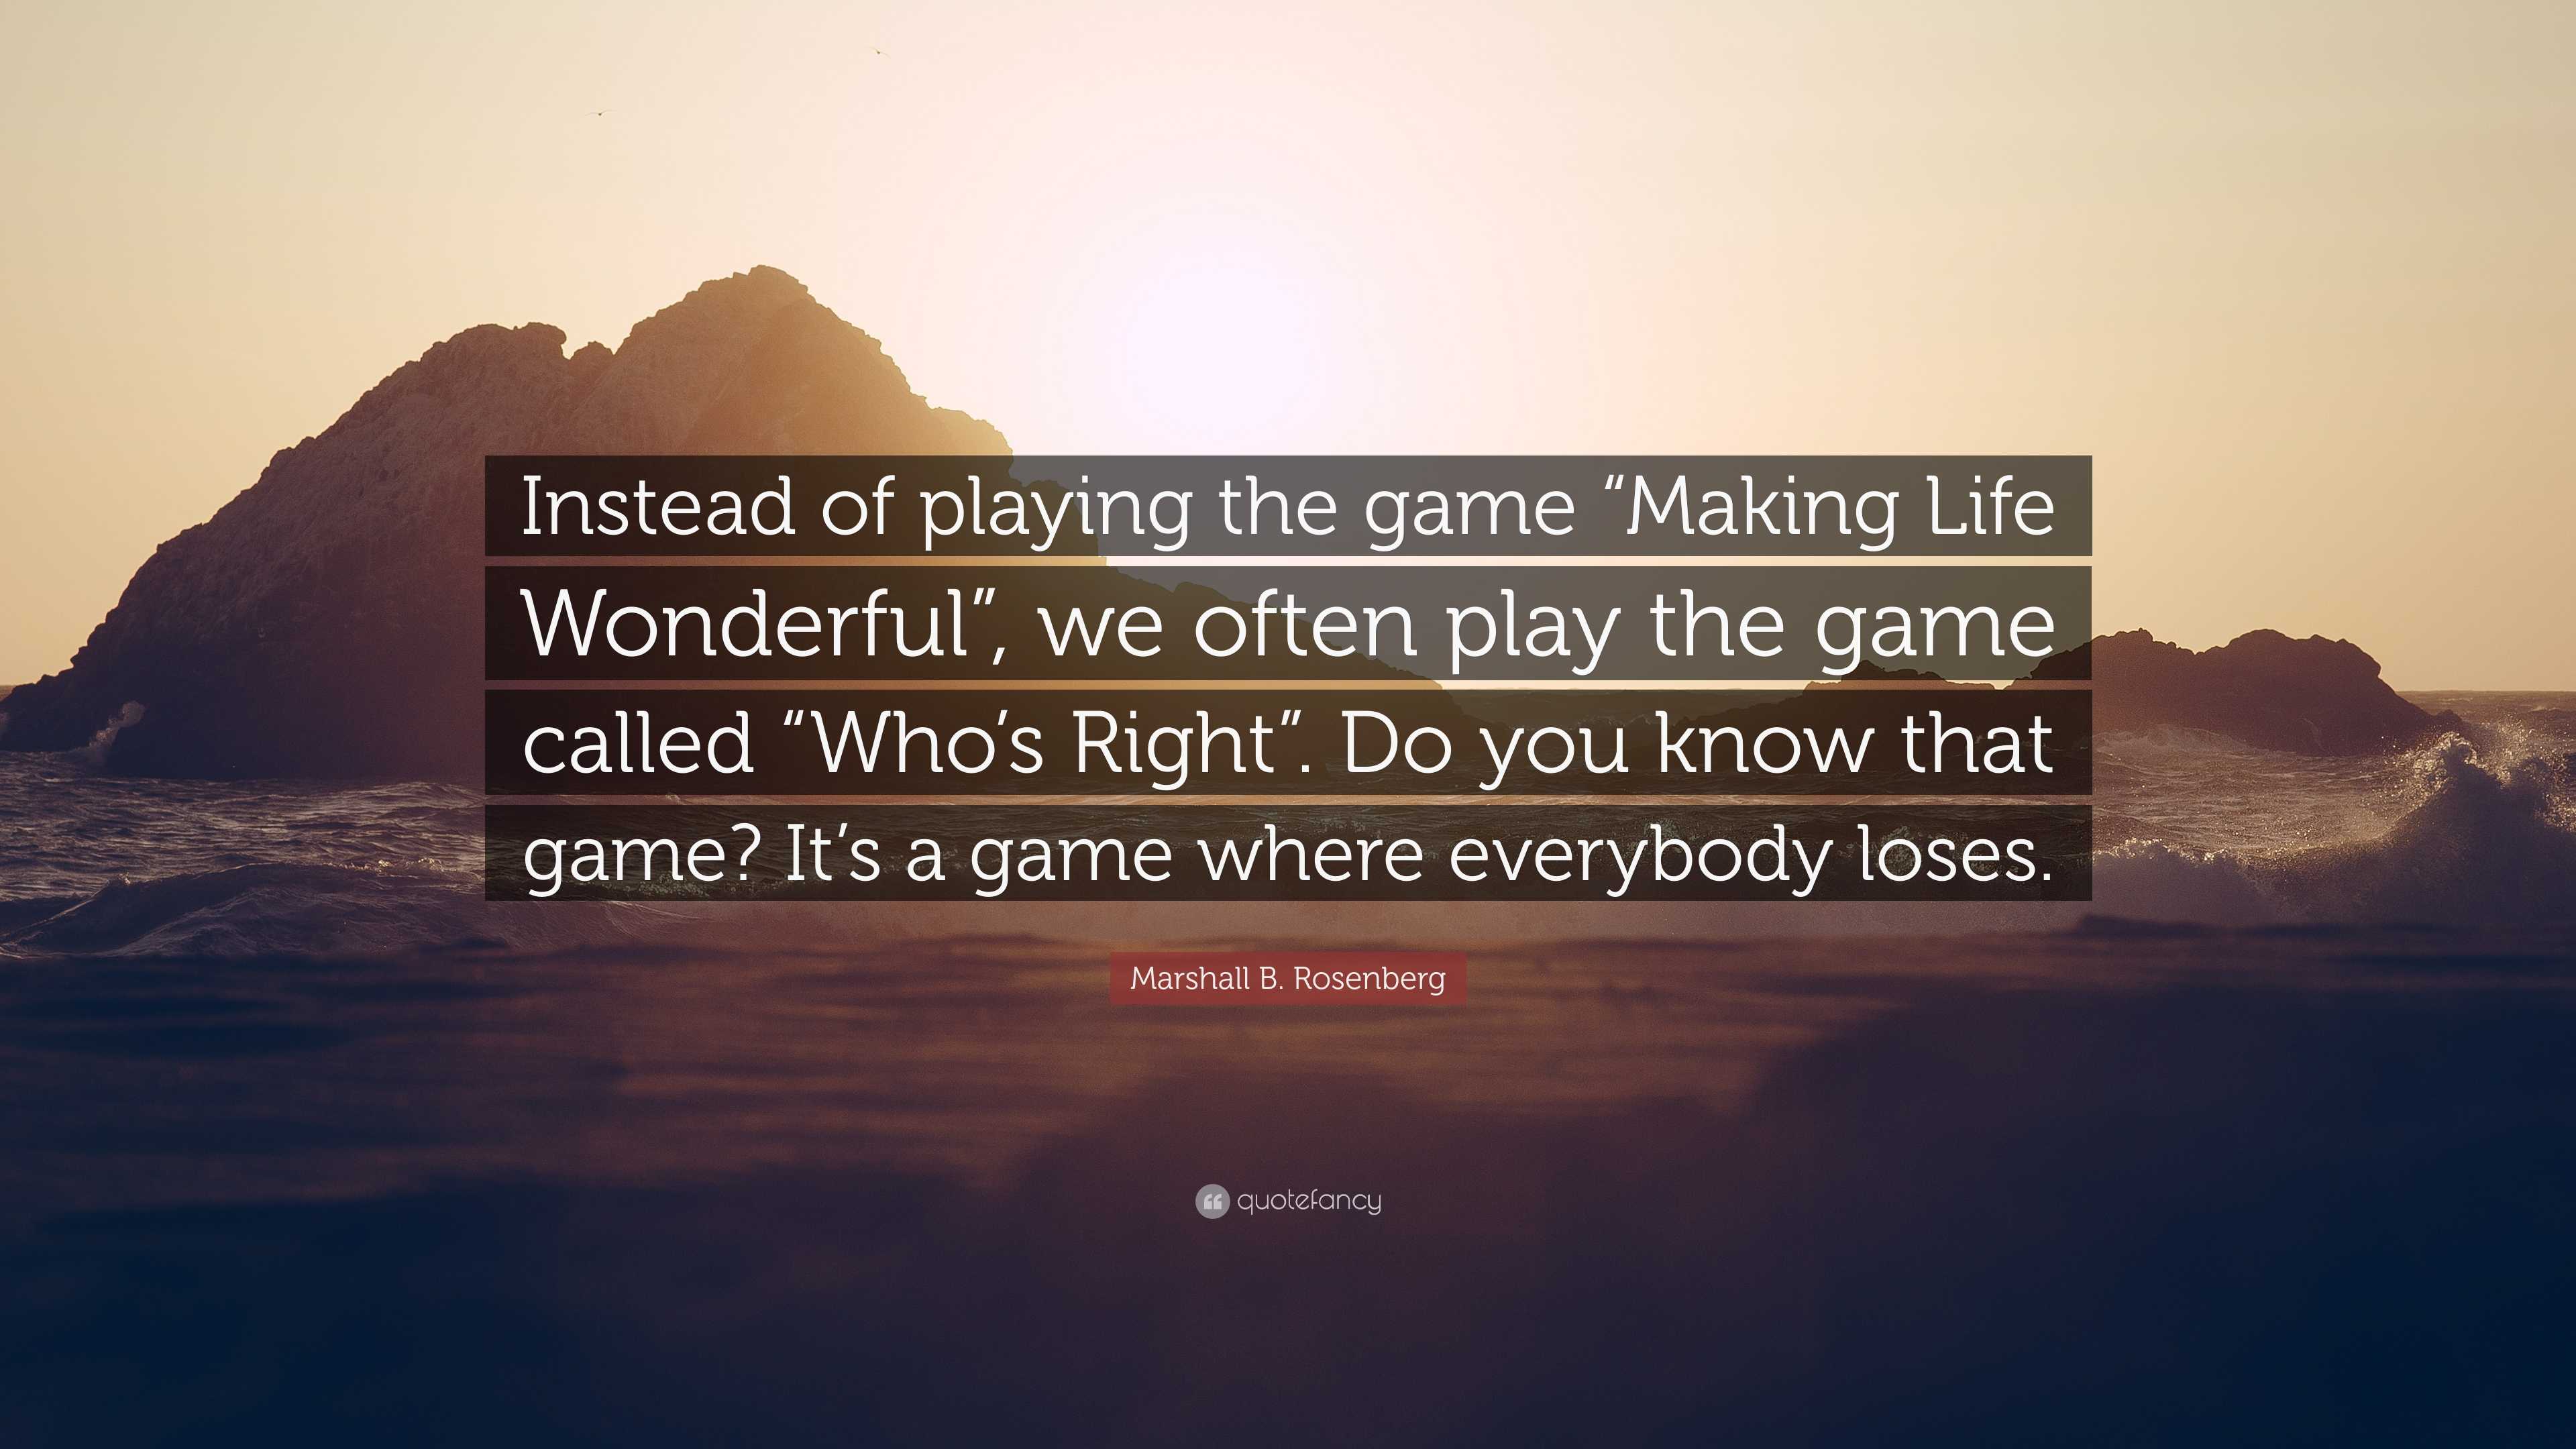 LIFE IS LIFE AND THE GAME SHOLLP BE A GAME, BUT IT KEEPS GETTING